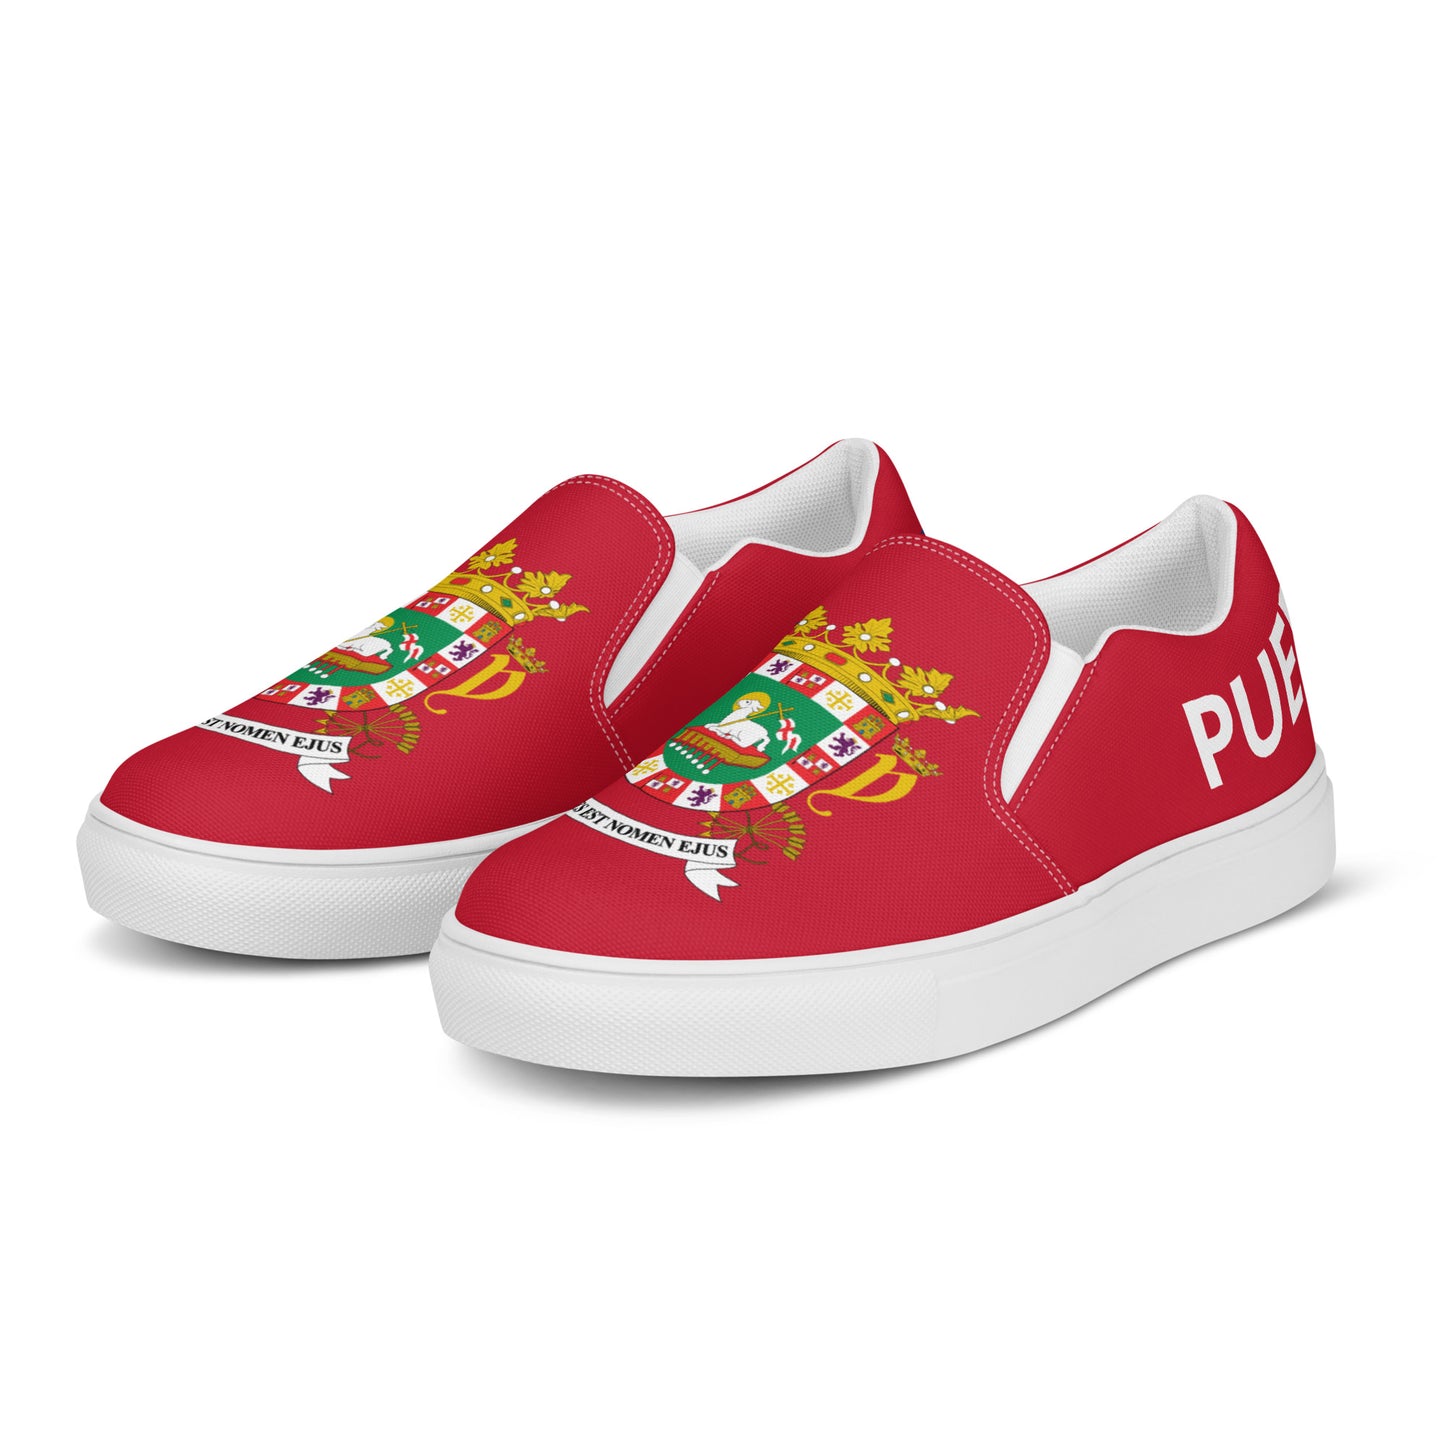 Puerto Rico - Men - Red - Slip-on shoes